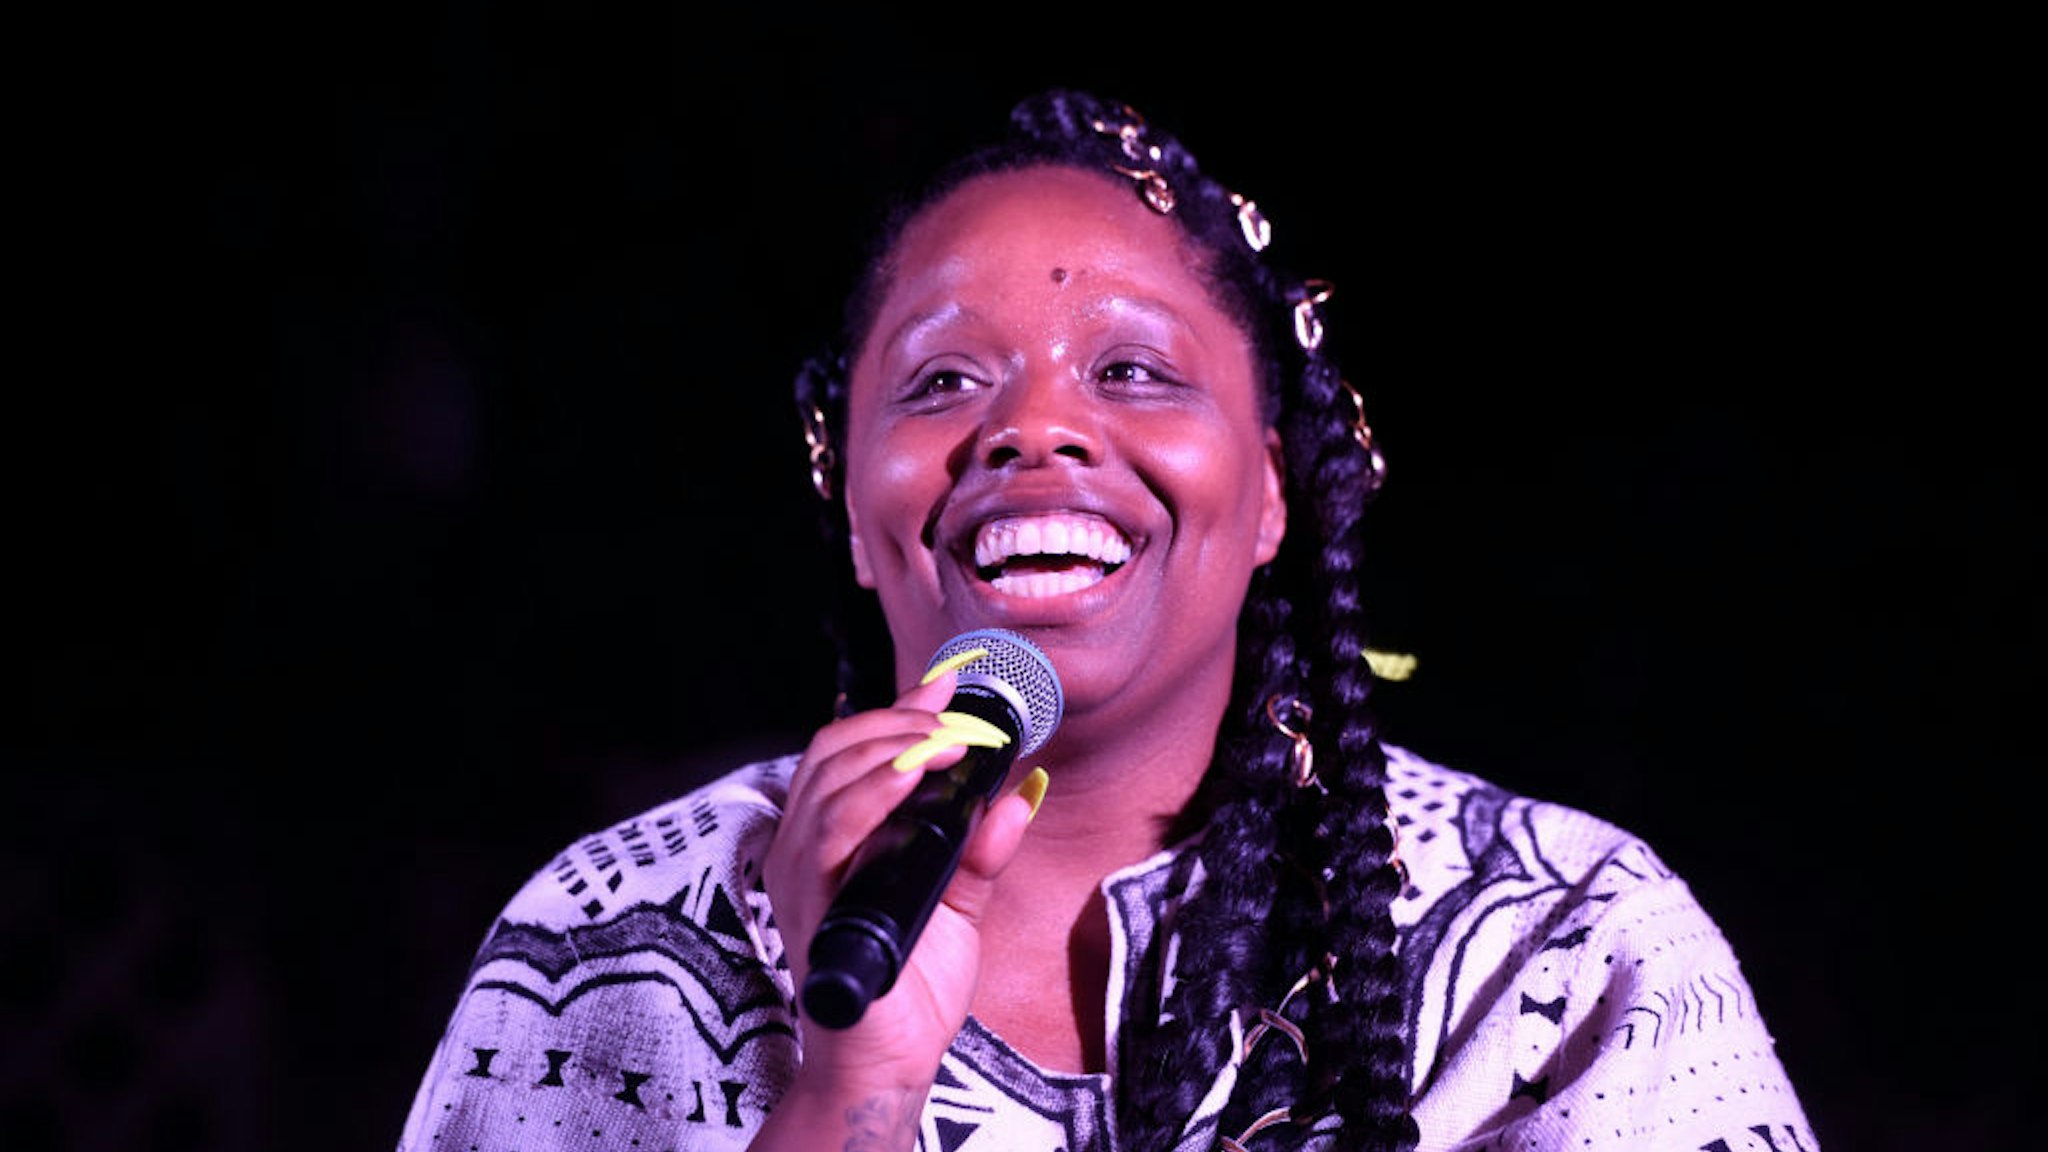 Patrisse Cullors speaks at her Thesis Solo Show on April 18, 2019 in Los Angeles, California.